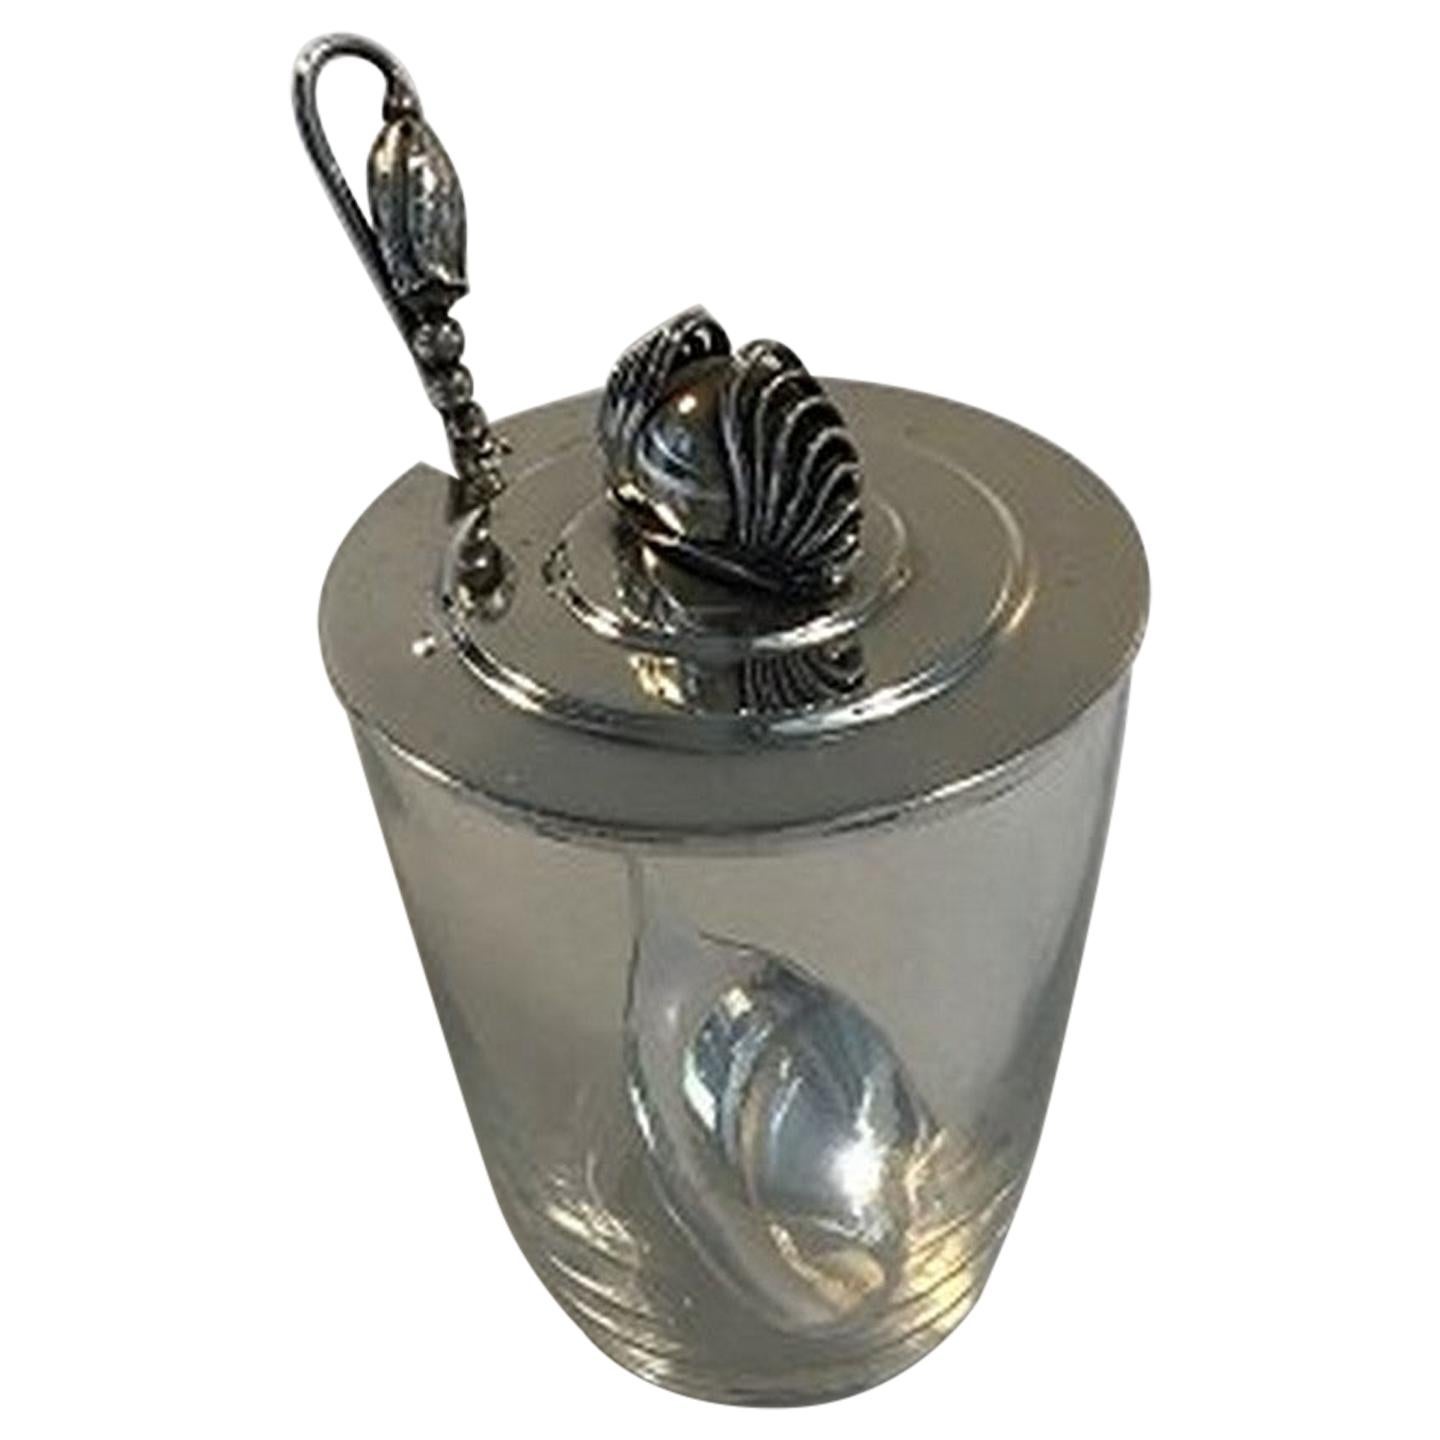 Georg Jensen Jam Jar with Sterling Silver Lid No 900 and Blossom Jam Spoon For Sale